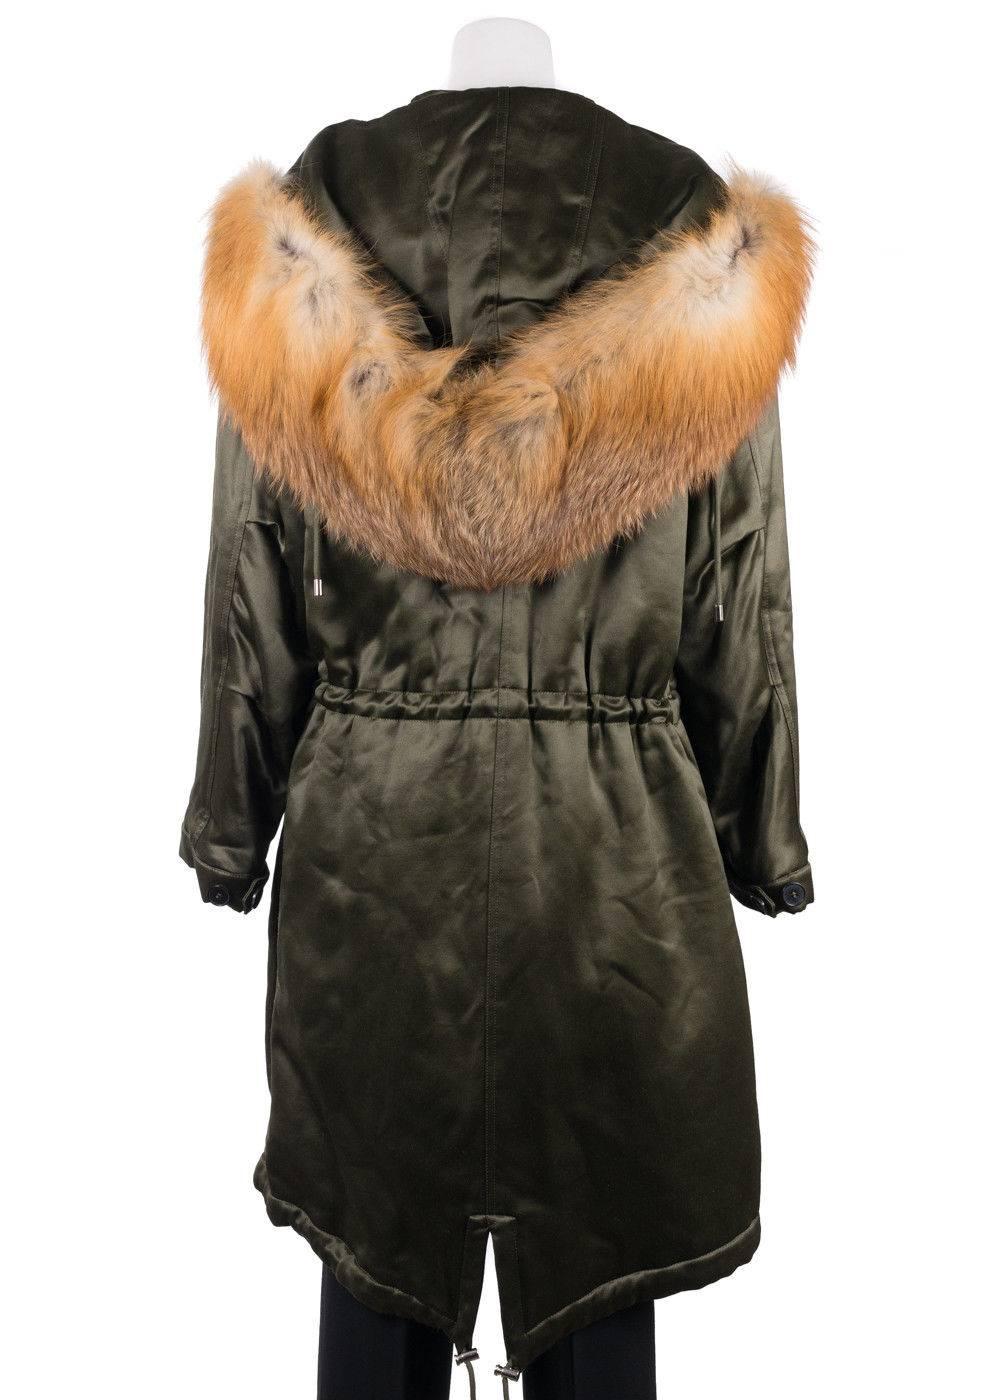 Brand New Alexander McQueen Satin Fox Fur Parka.
Original Tag
Retails in Stores & Online for $4310
Women's Size EUR 40/ US 4 Fits True to Size

Stay cozy in your Alexander McQueen Parka on the go. This satin coat was designed using fine wool